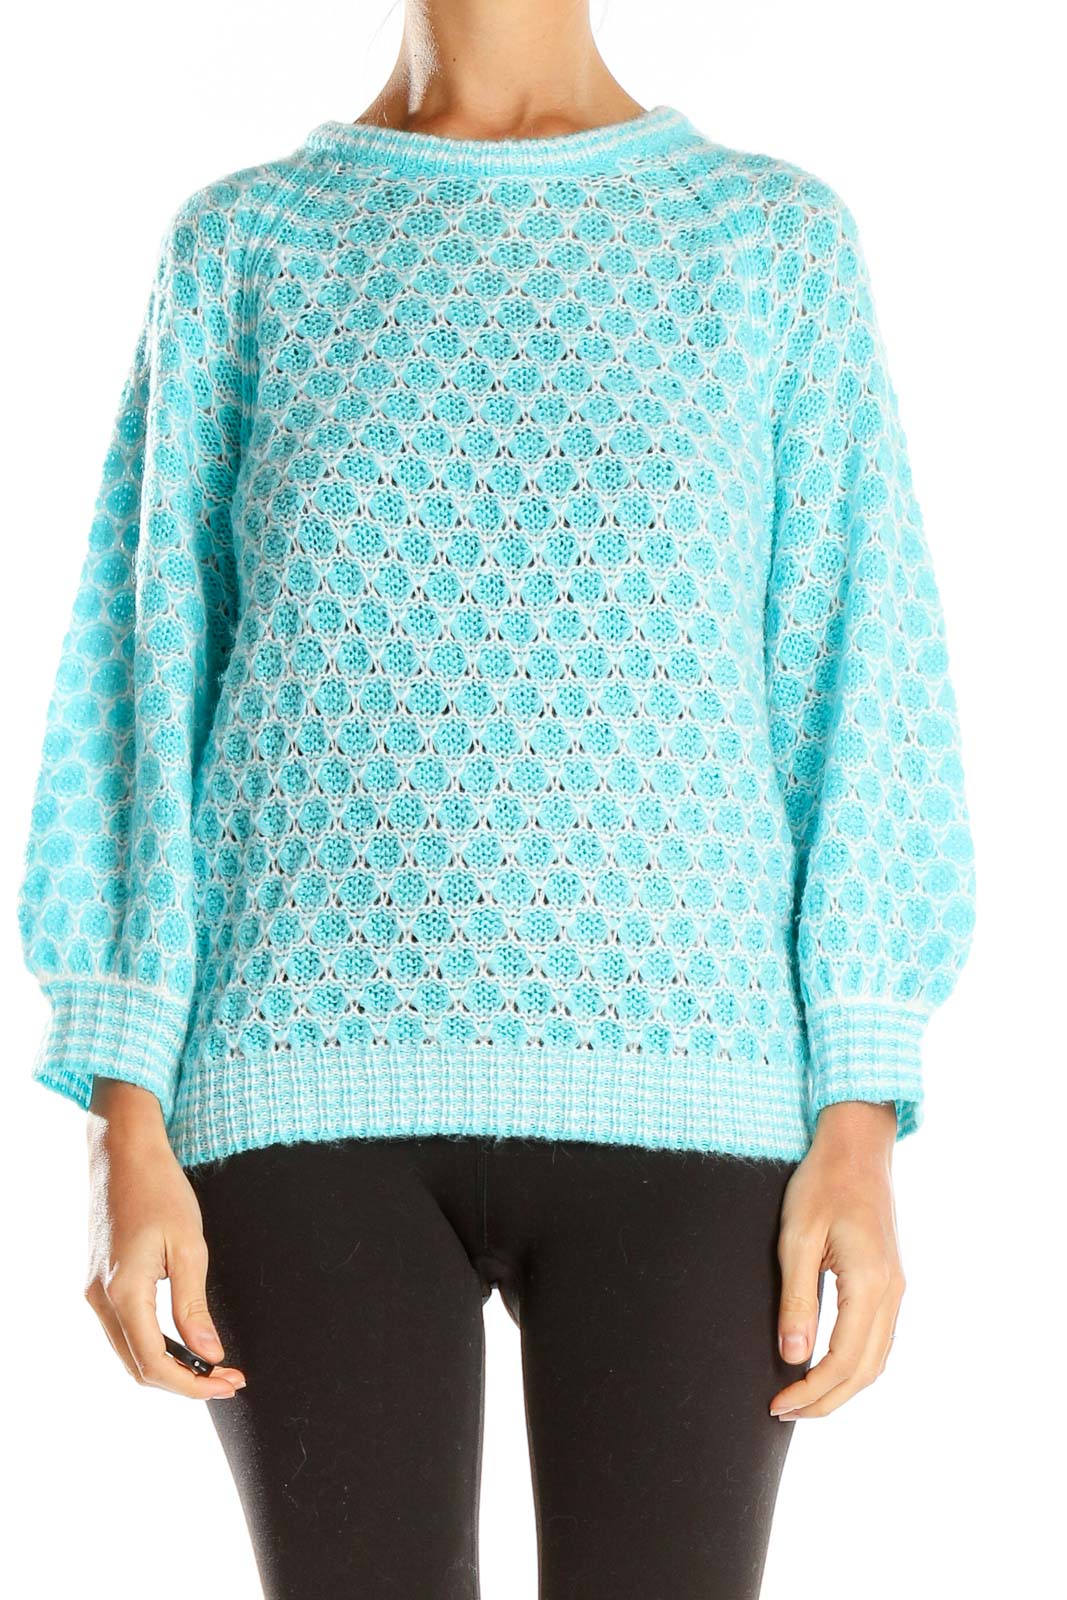 Blue Chic Knitted Sweater Front